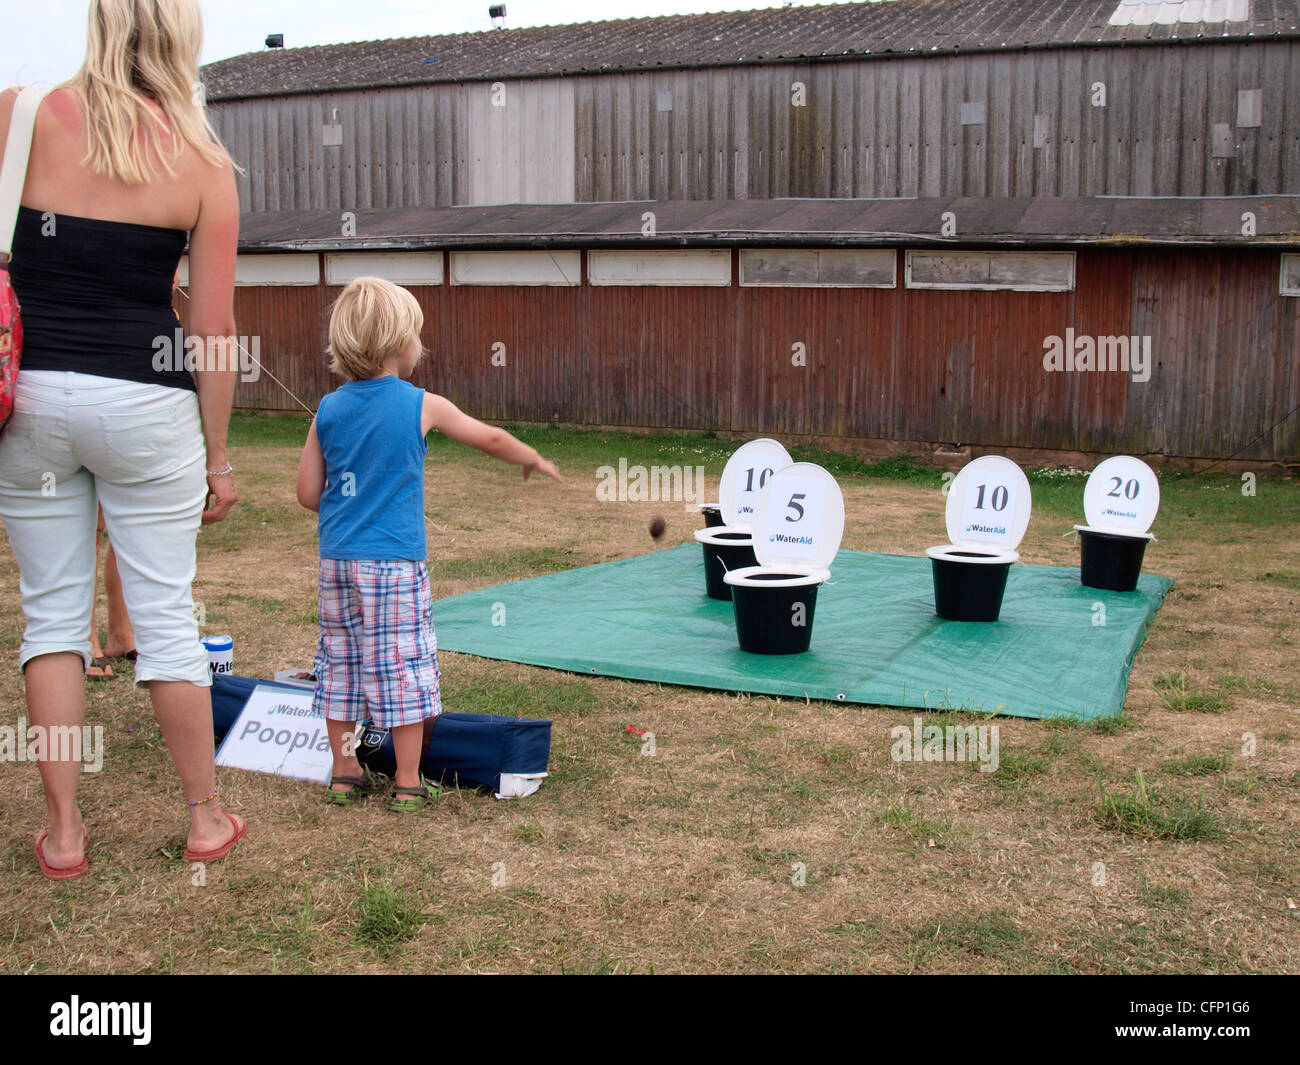 Young boy playing Wateraid's game of poopla involving throwing lumps of poo into buckets to raise money, UK Stock Photo